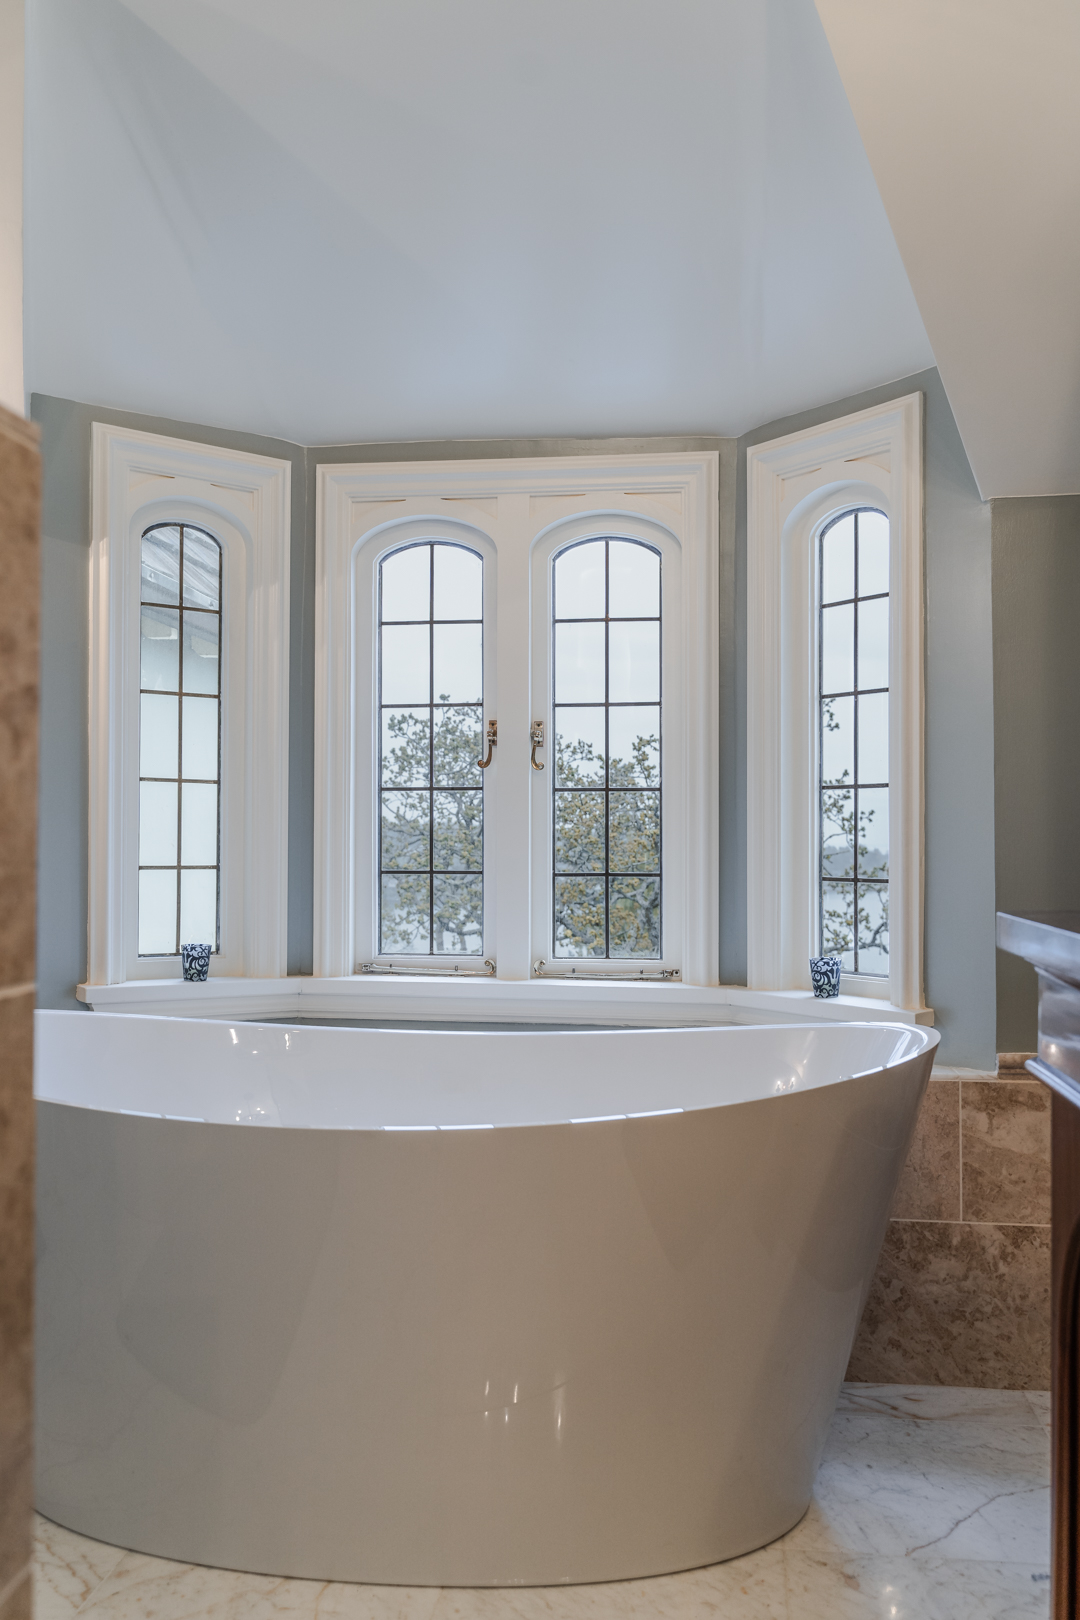 Freestanding bathtub surrounded by arched windows